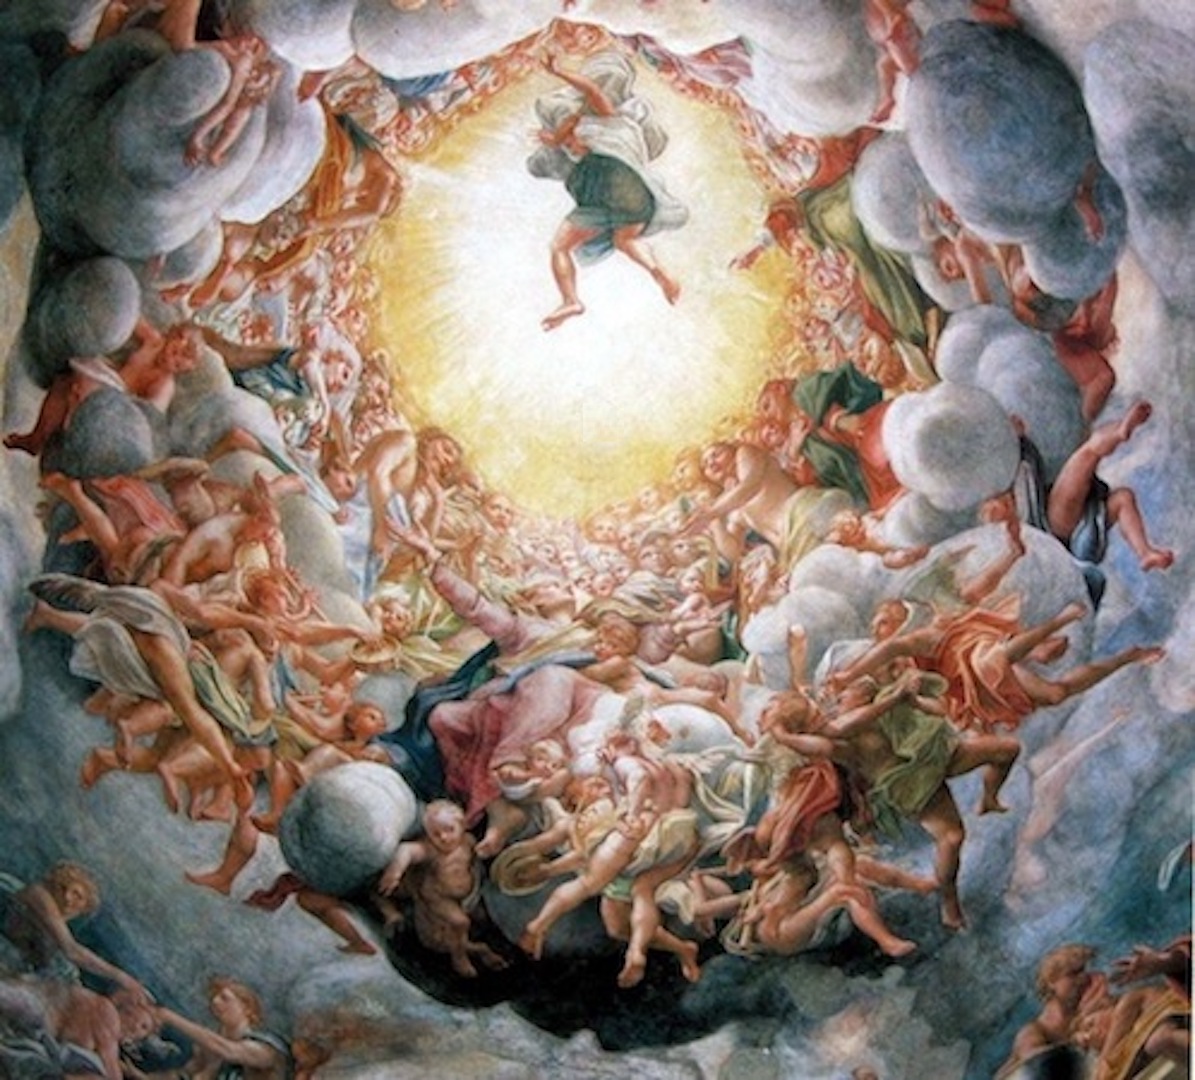 THREAD: Problems depicting HEAVEN # 1: Overpopulation.Renaissance painters attempted to depict the vast number of saved souls in heaven plus the hierarchy of angels. The result: heaven is depicted as overpopulated & cramped. HellishCorreggio - Assumption of the Virgin (1522-30)